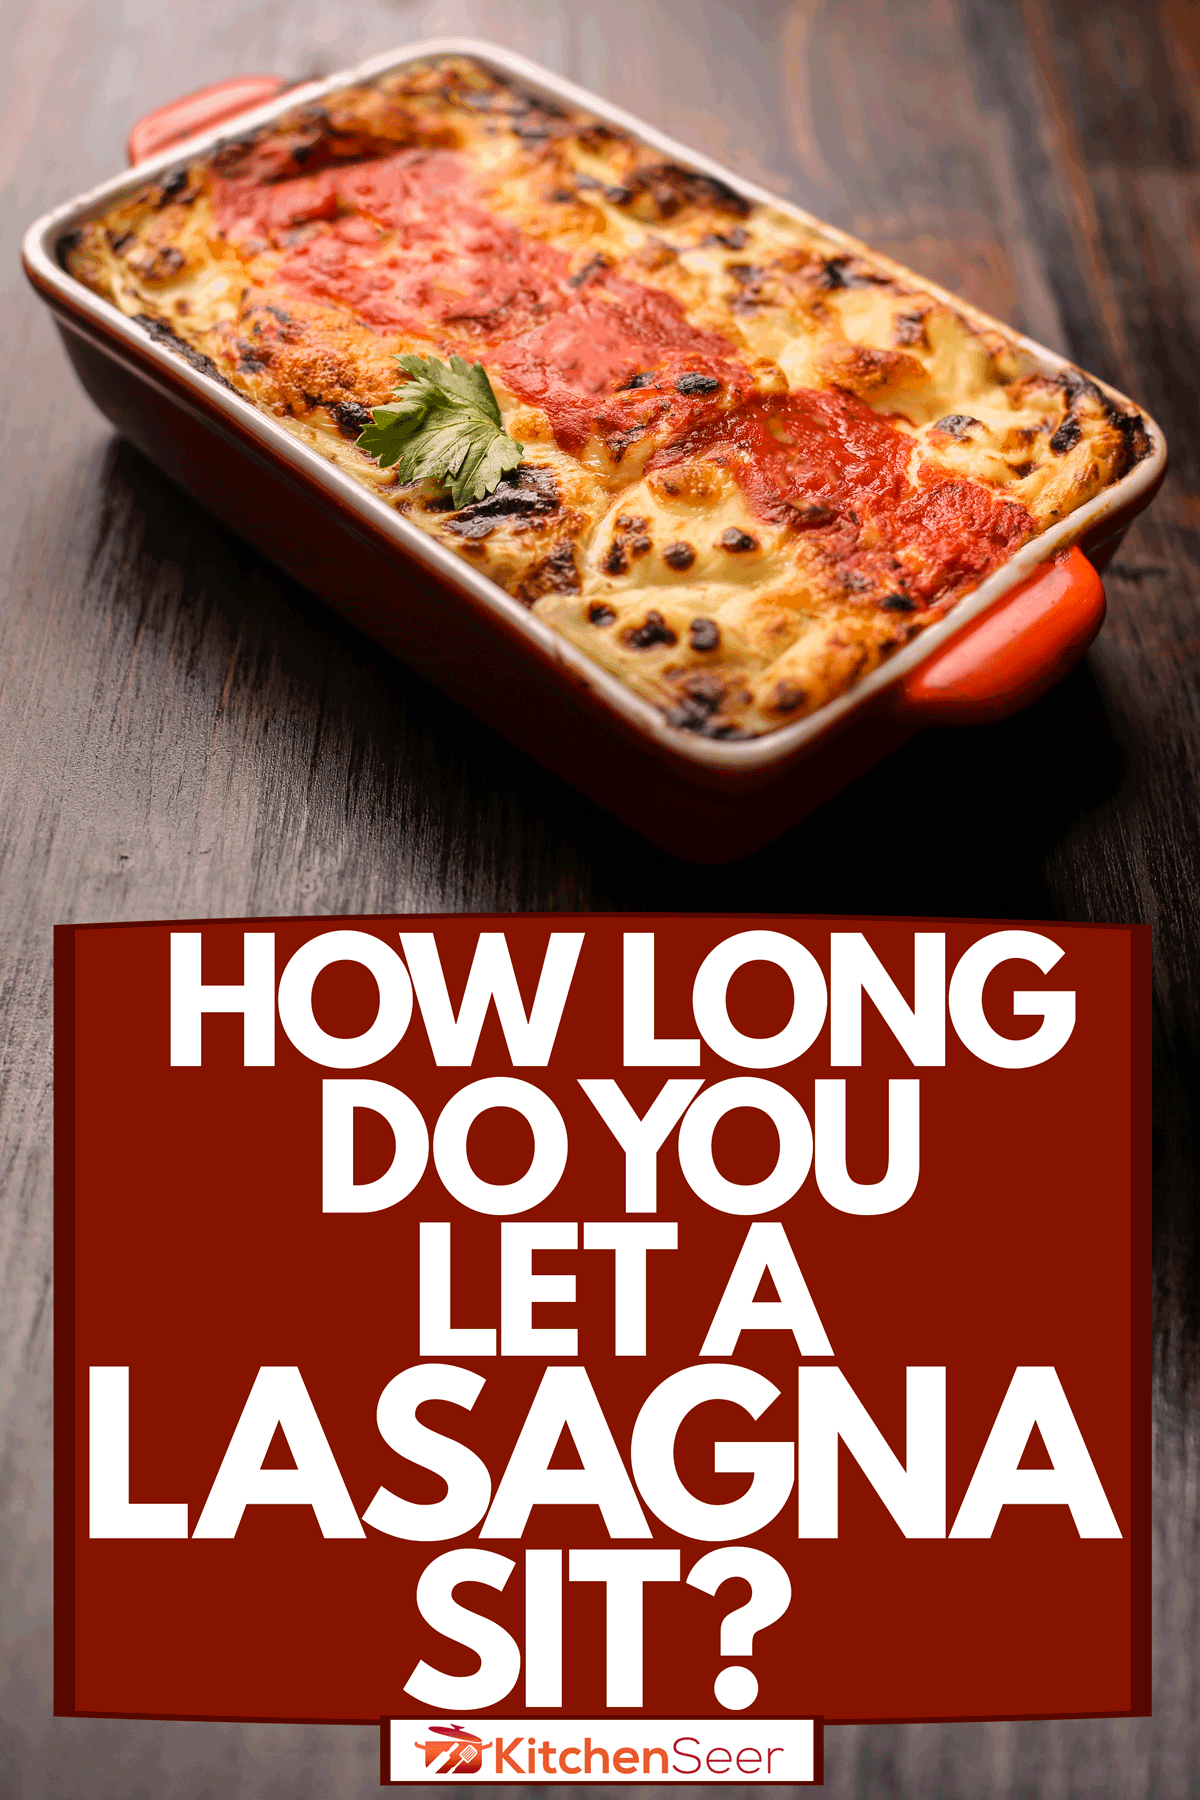 A freshly baked pot of lasagna on a red ceramic container, How Long Do You Let a Lasagna Sit?